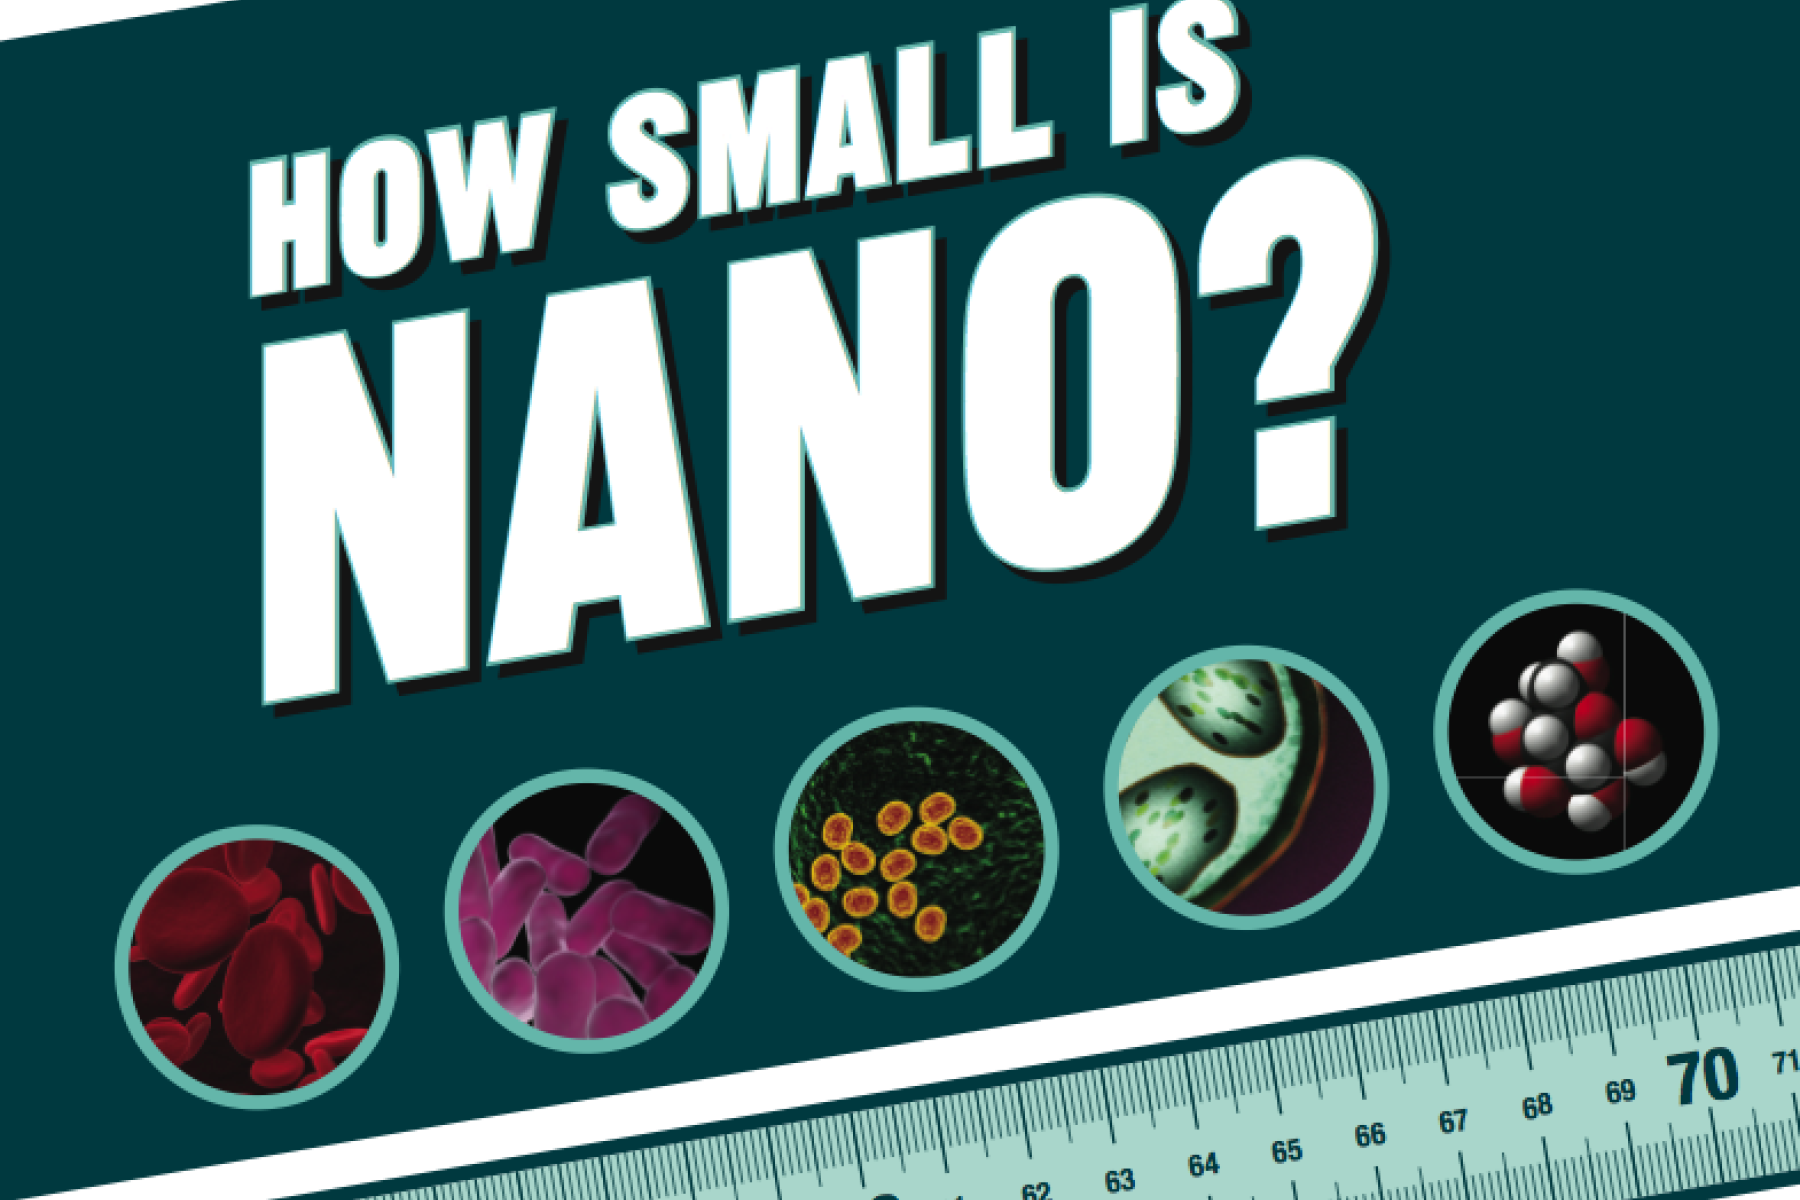 "How Small is Nano?" with five images of various cells and a ruler just below